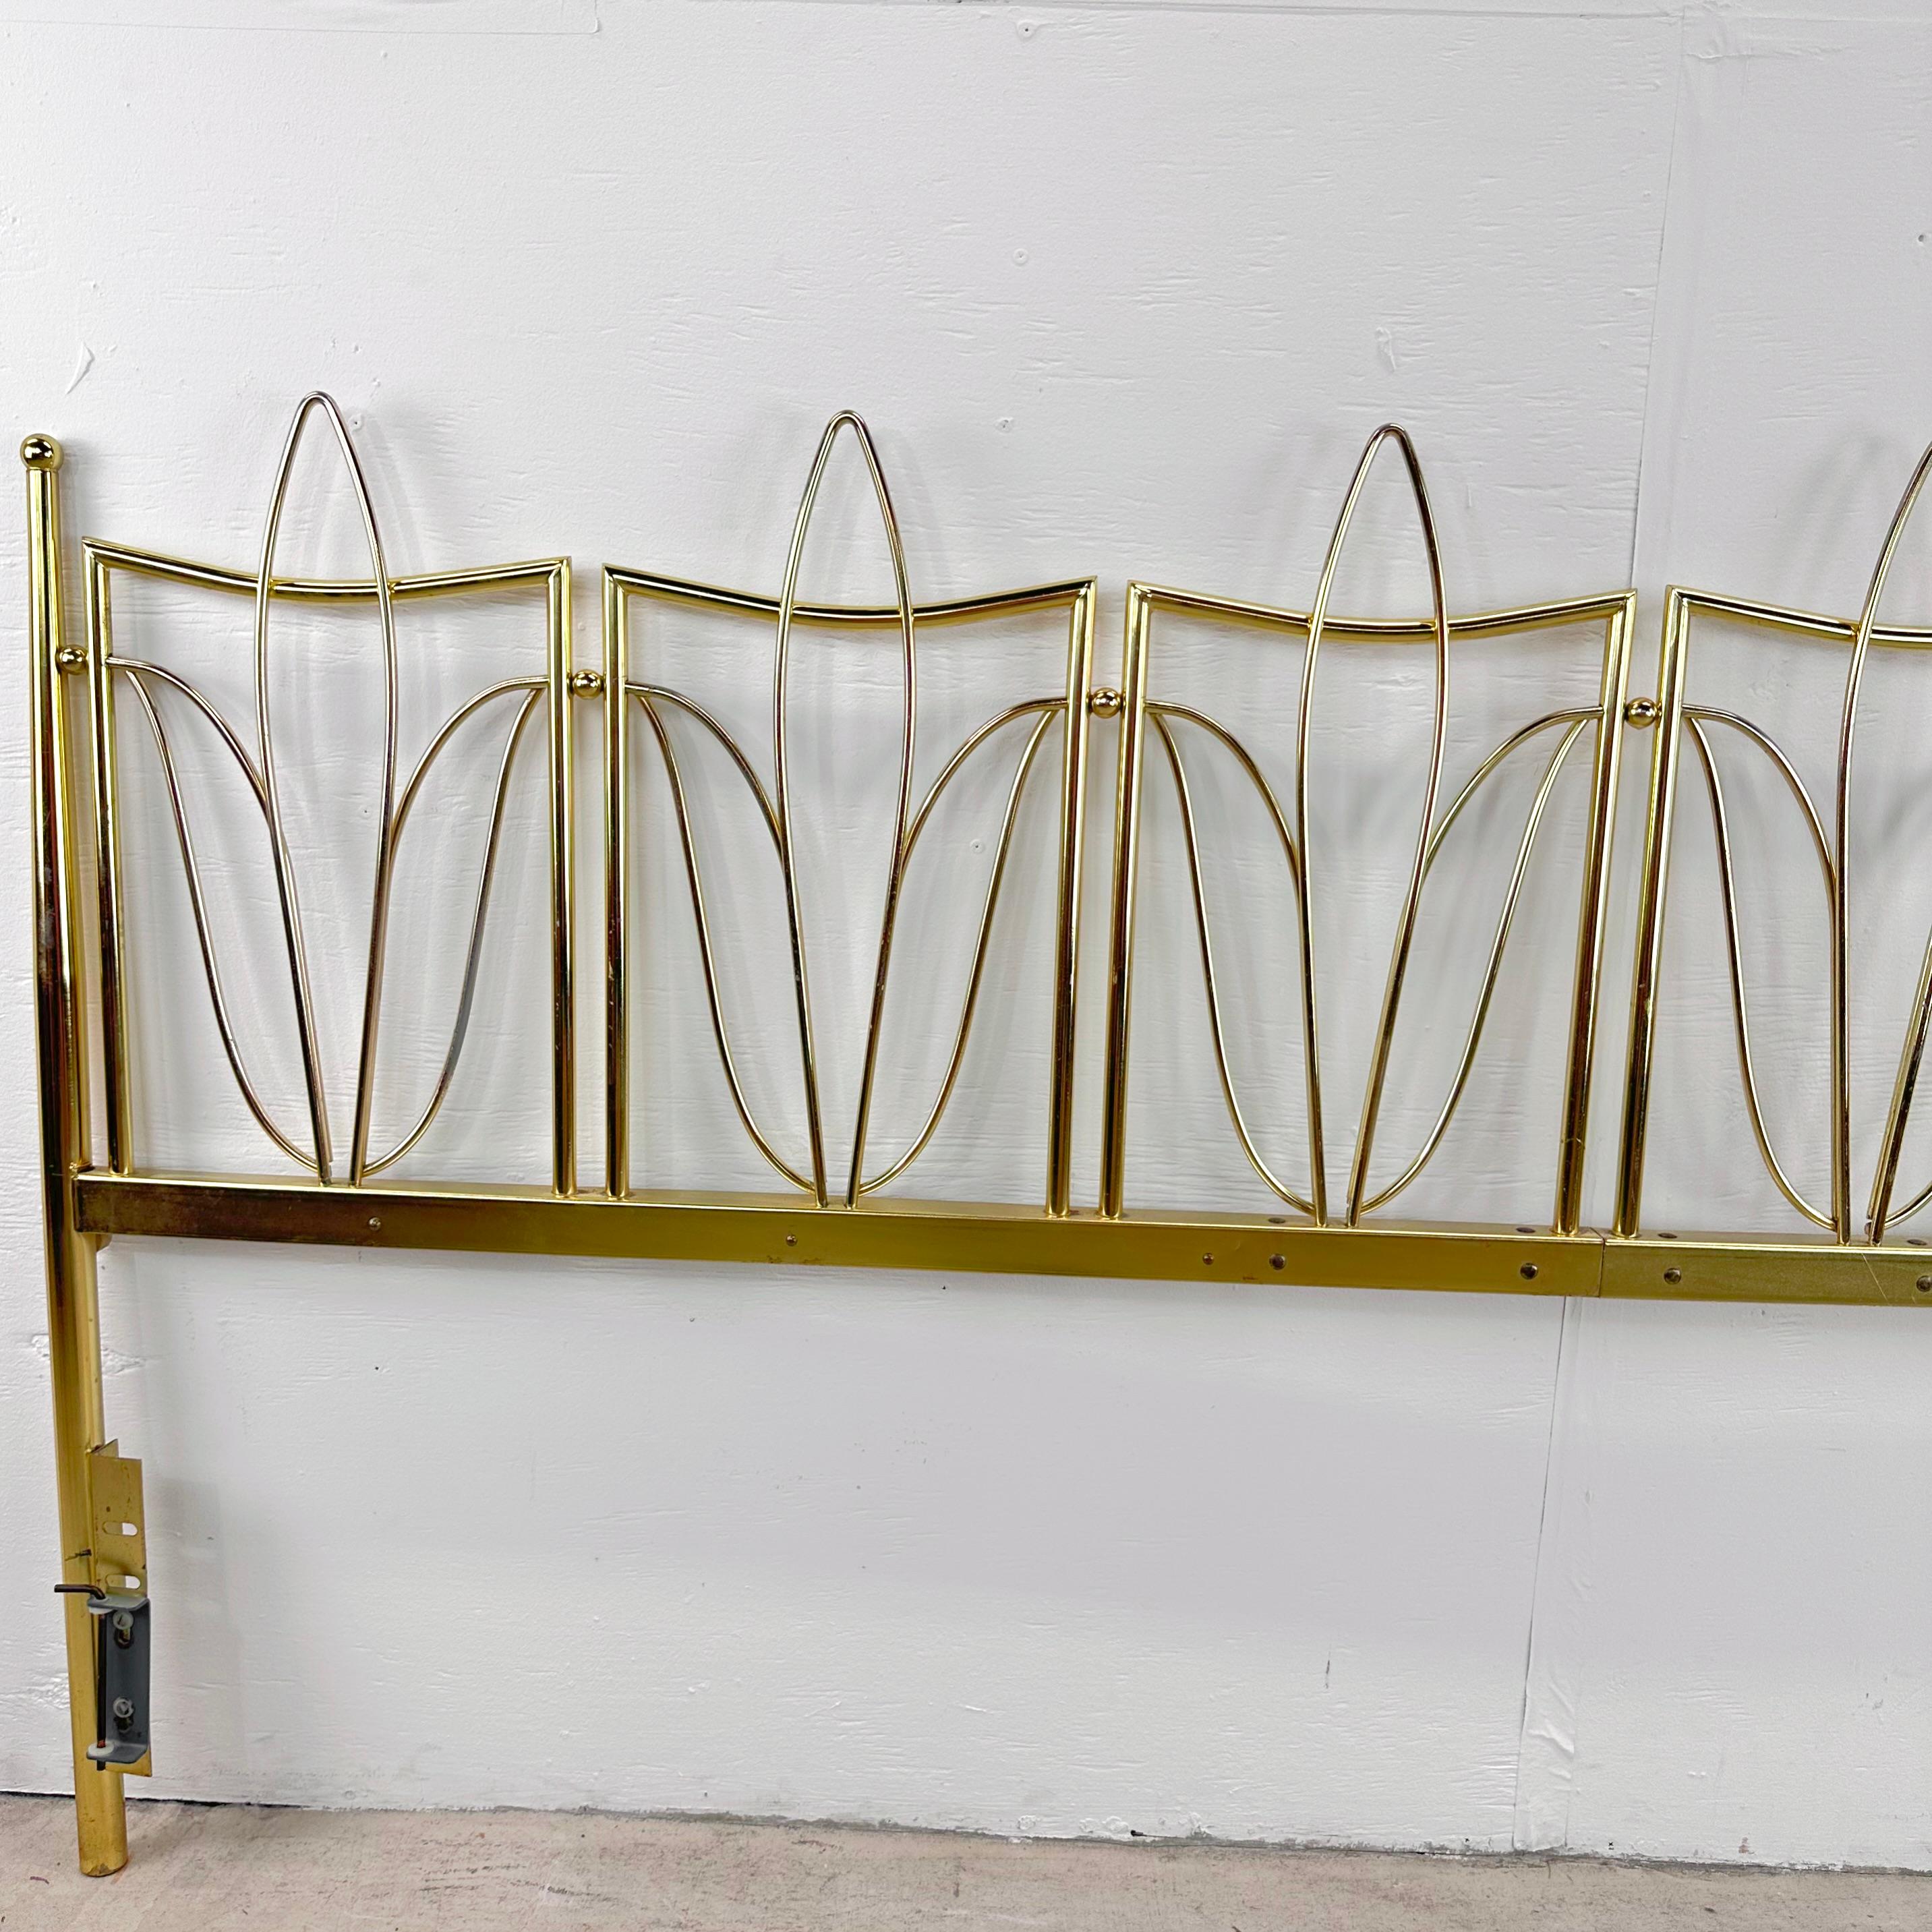 Experience the Glamour of a Bygone Era with this decorative Mid-Century Hollywood Regency King Size Headboard. Crafted with the finest attention to detail, this headboard is a testament to the artistic brilliance of mid-century craftsmanship. The